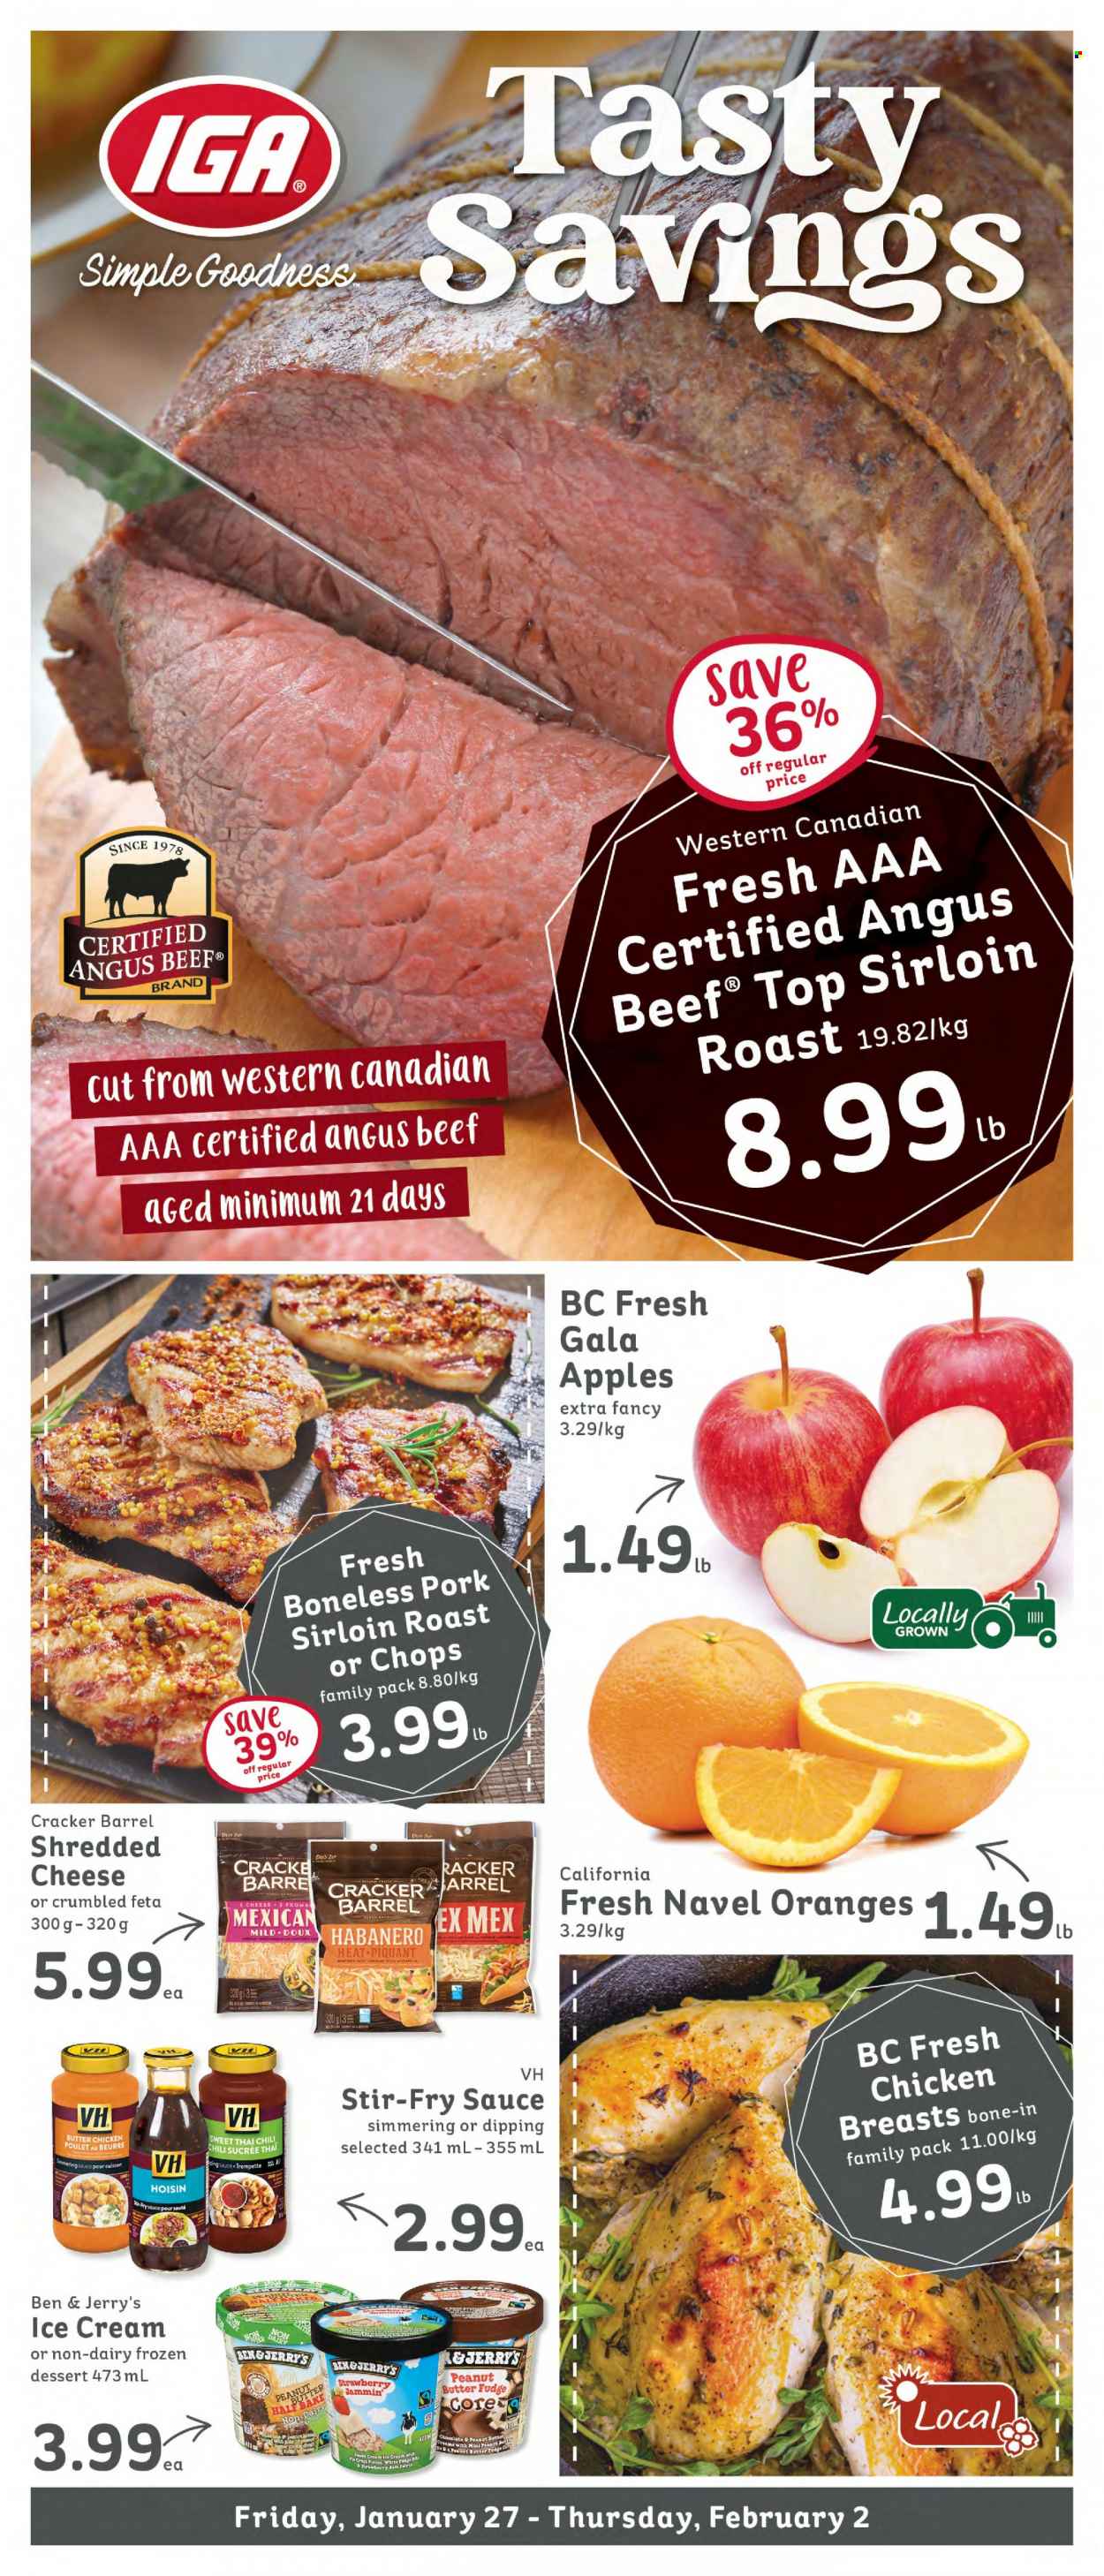 thumbnail - IGA Simple Goodness Flyer - January 27, 2023 - February 02, 2023 - Sales products - apples, Gala, oranges, navel oranges, sauce, shredded cheese, cheddar, feta, ice cream, Ben & Jerry's, fudge, crackers, strawberry jam, hoisin sauce, fruit jam, peanut butter, beef meat, pork loin. Page 1.